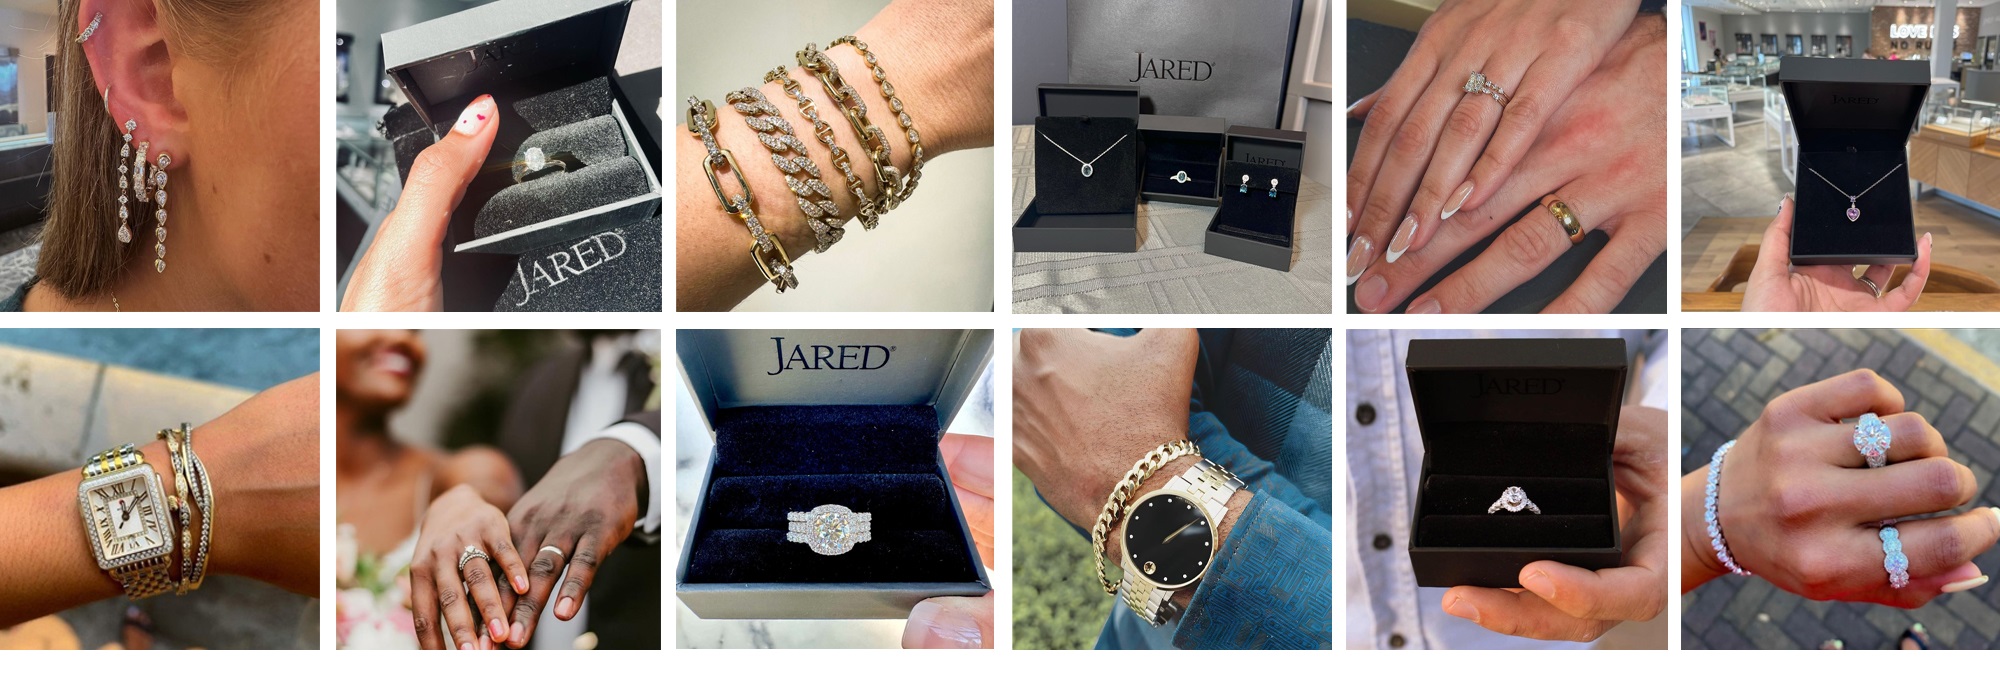 Multiple images of customer generated photos of them with multiple jewelry purchases from Jared The Galleria Of Jewelry